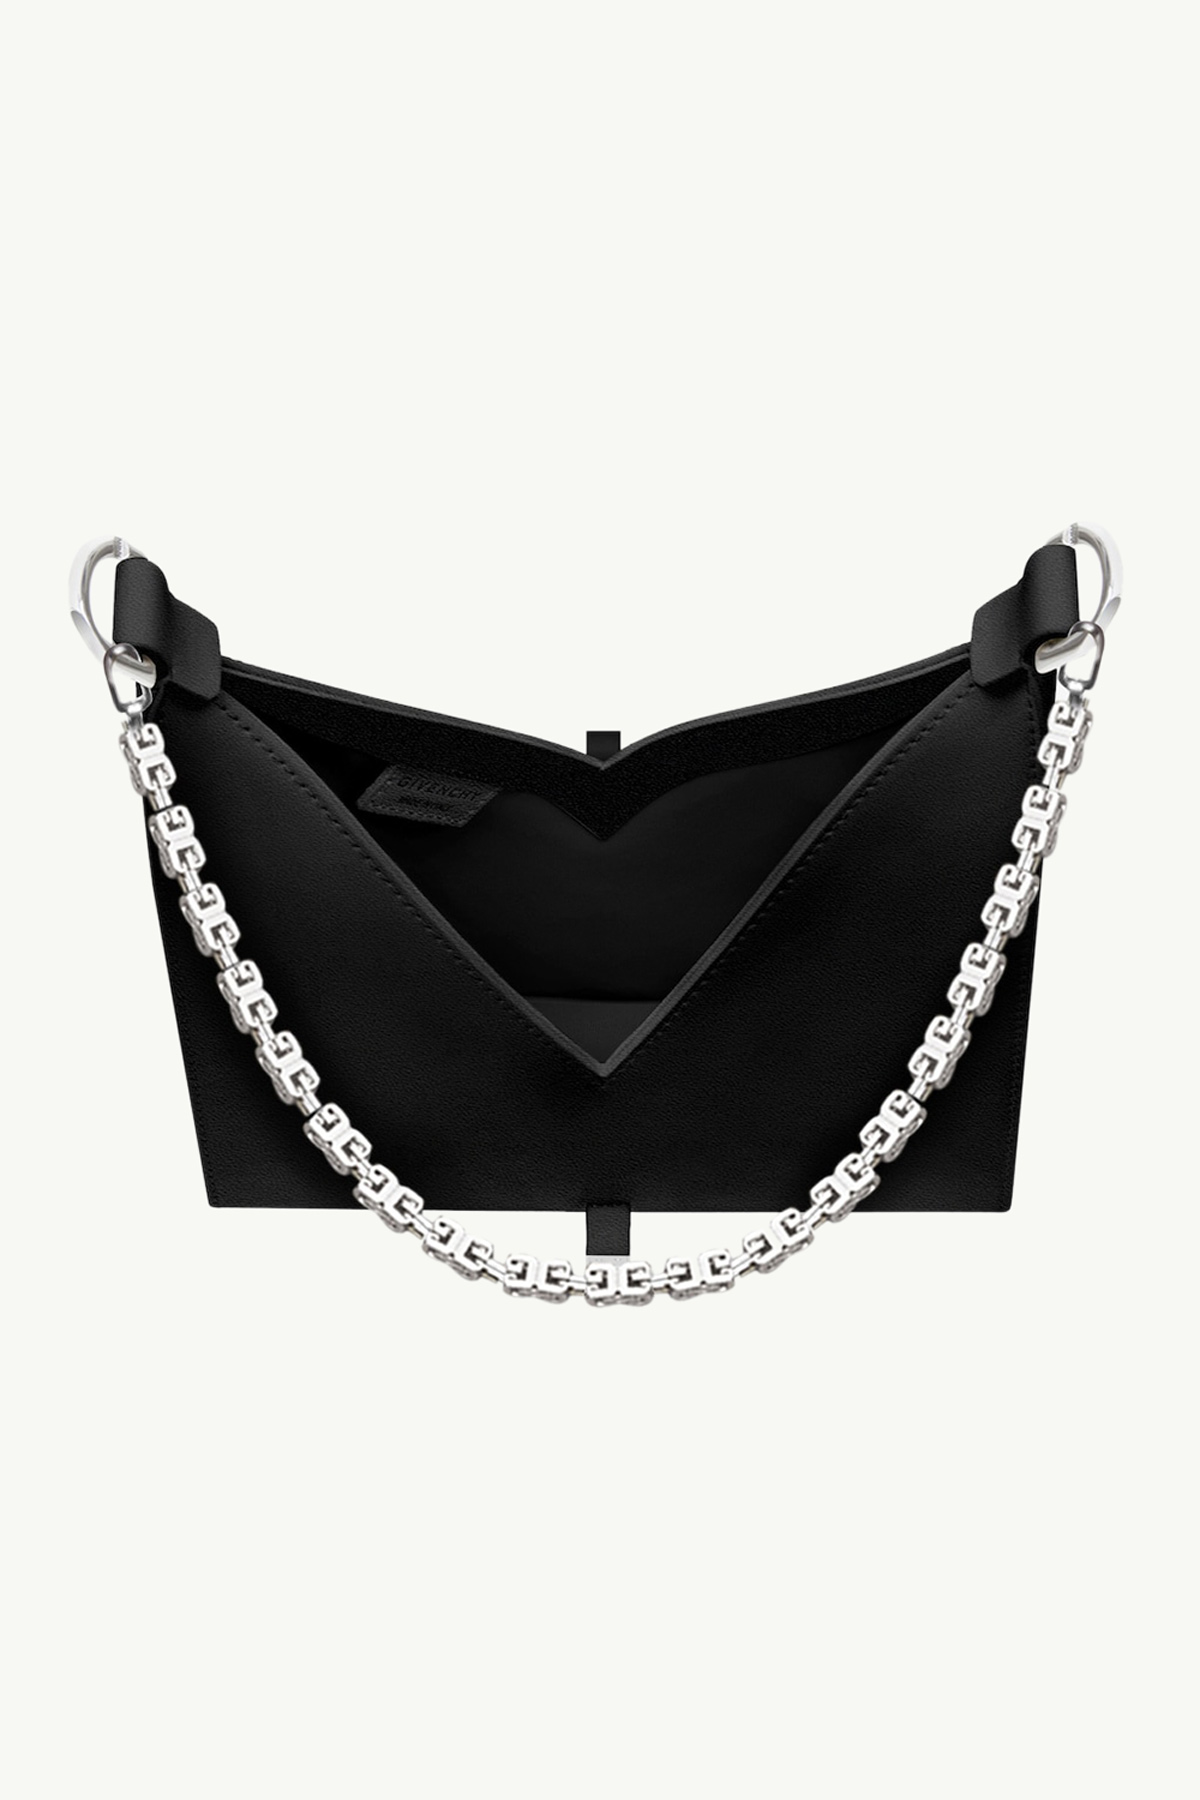 GIVENCHY Mini Cut Out Crossbody Bag in Black Smooth Box Calfskin Leather with Chain 4